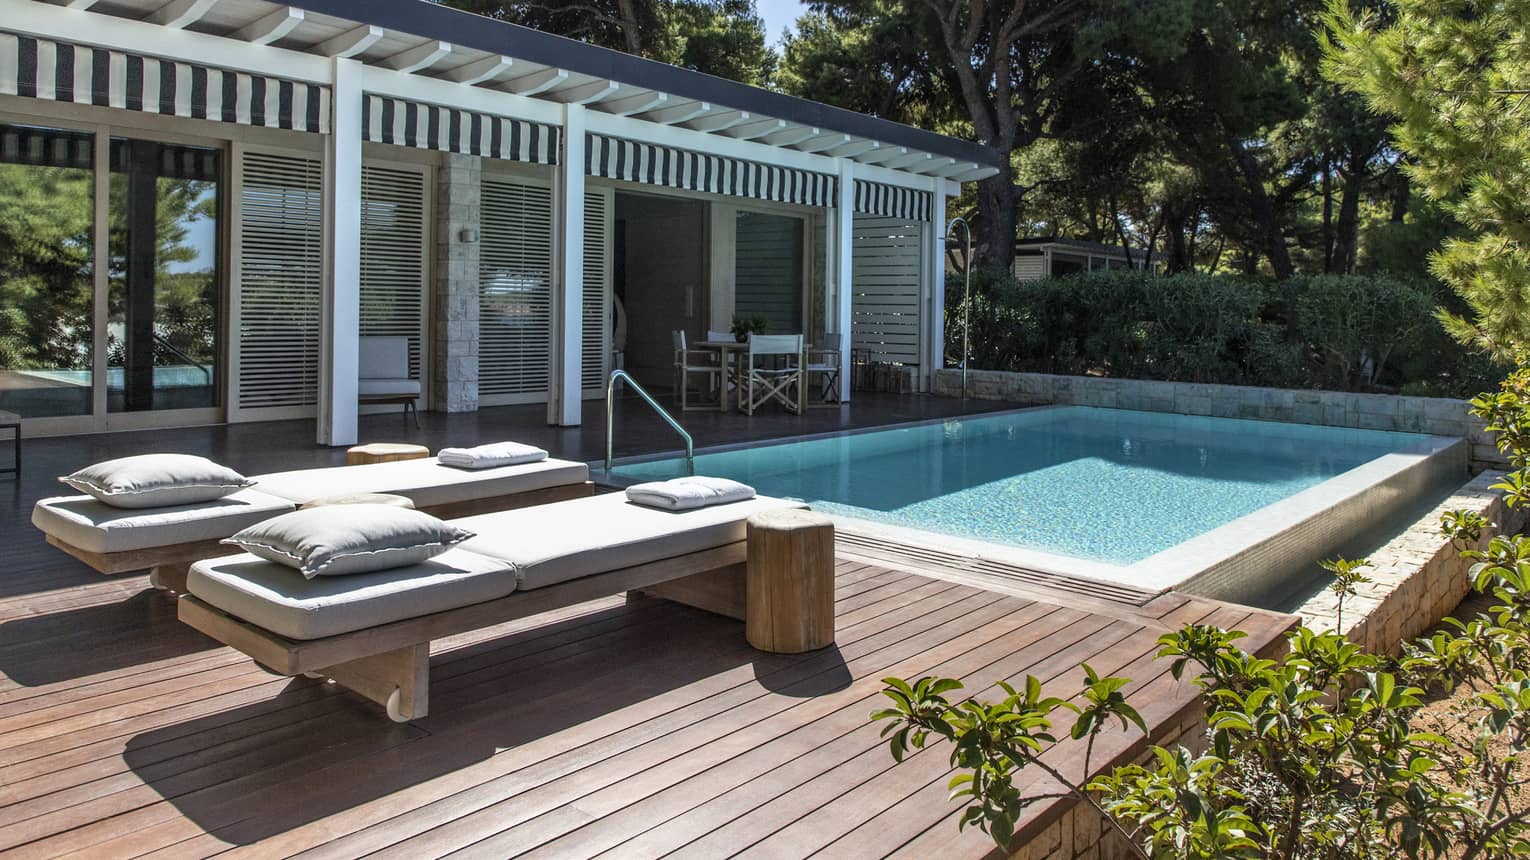 Private wooden deck with two lounge chairs and pool, surrounded by greenery,Private outdoor pool with luxurious sun loungers, contemporary pergola design and lush greenery, offering a private retreat and serene sea views